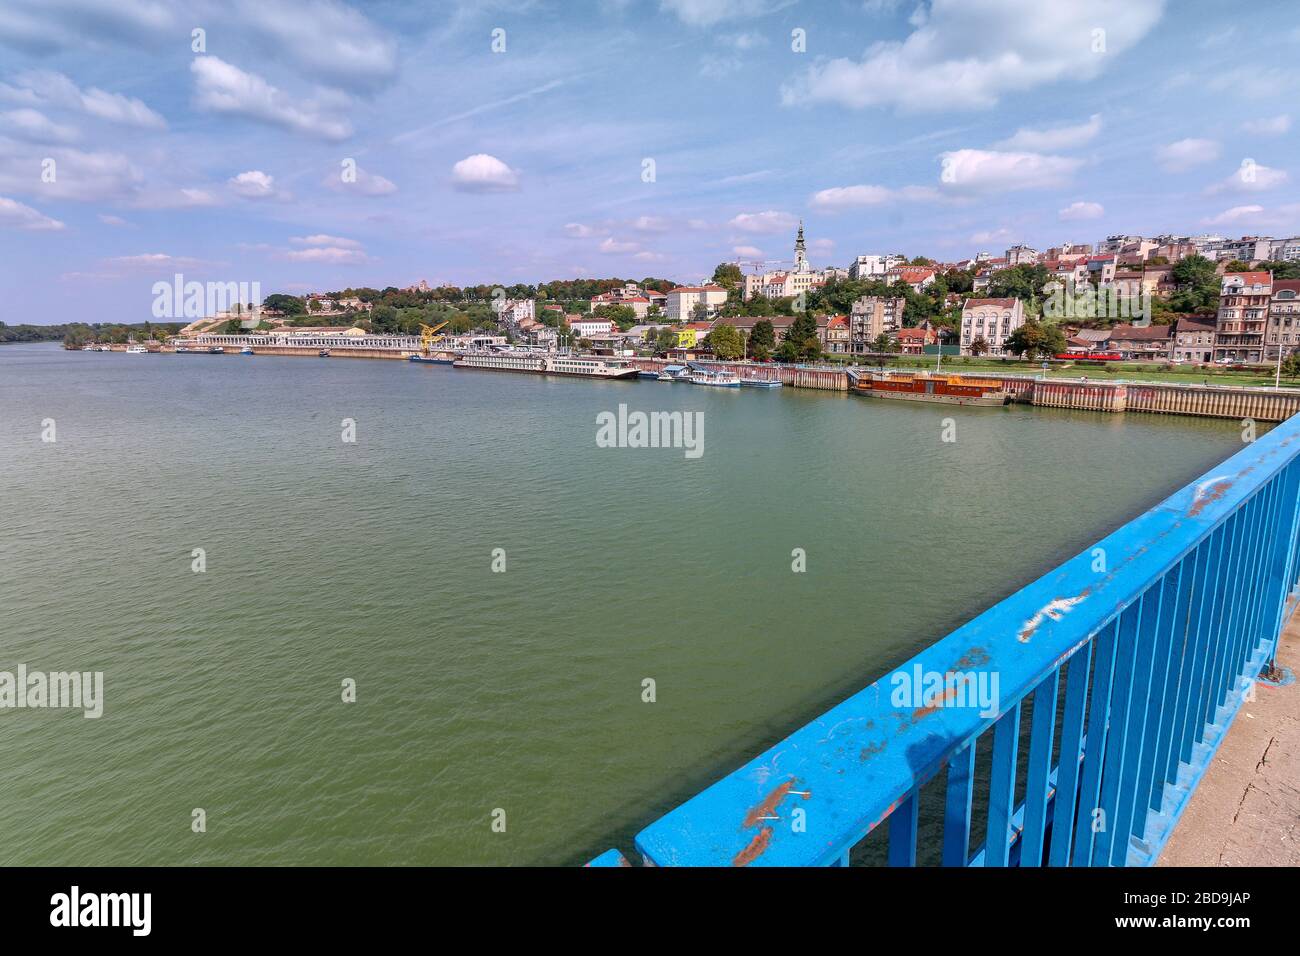 Looking from a bridge to floating houses and night clubs on Sava River at Belgrade, Serbia in a partially cloudy day. Stock Photo